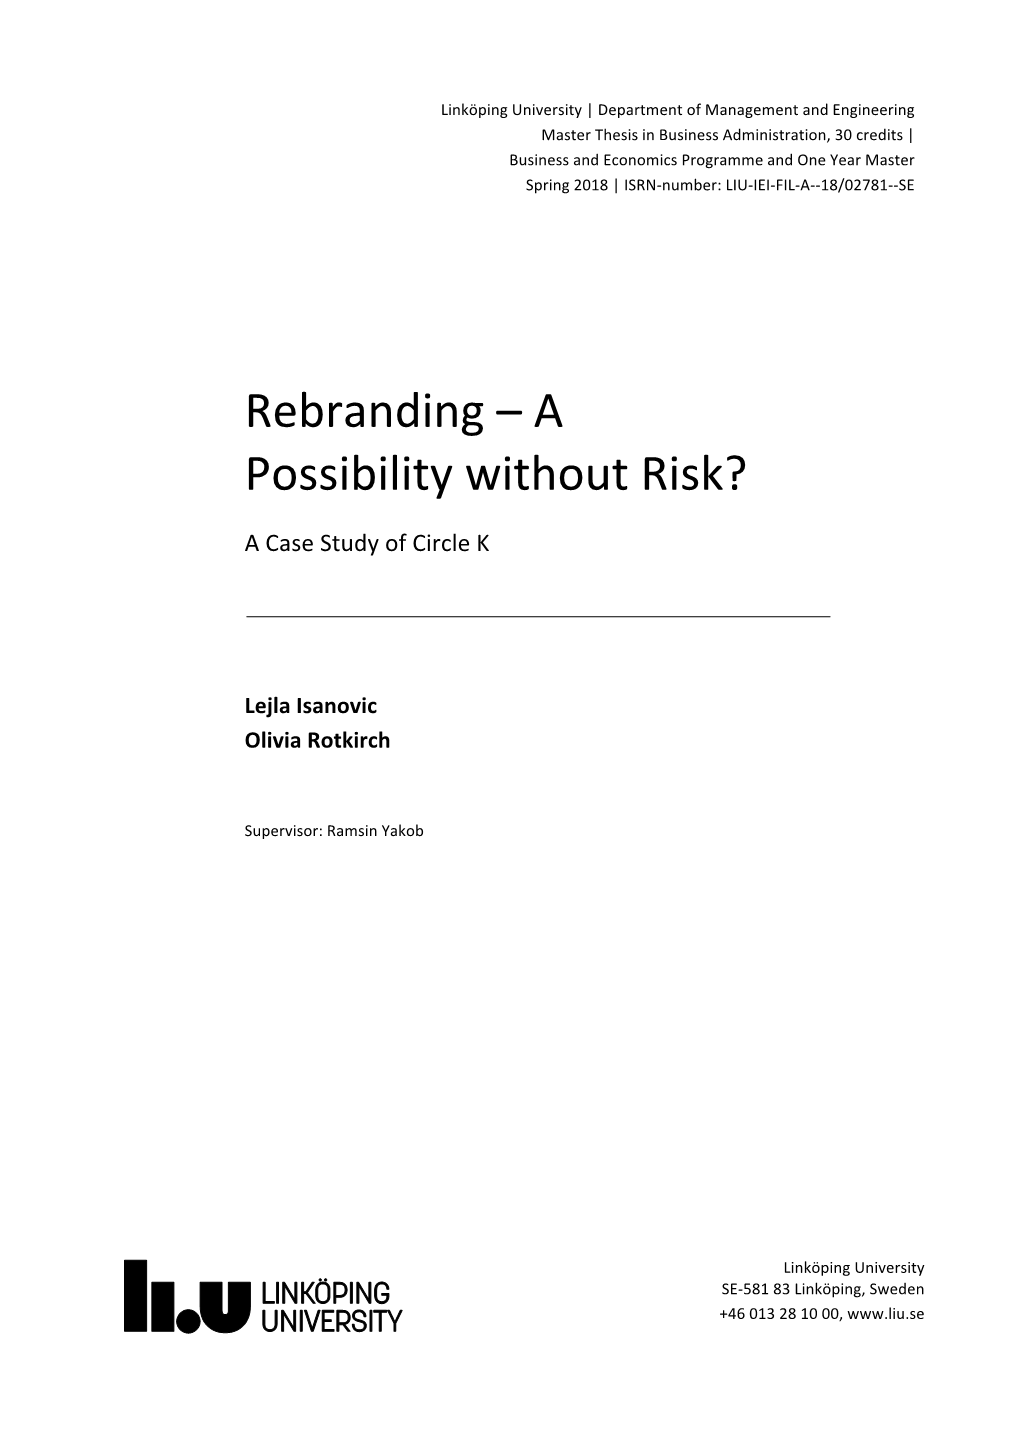 Rebranding – a Possibility Without Risk?